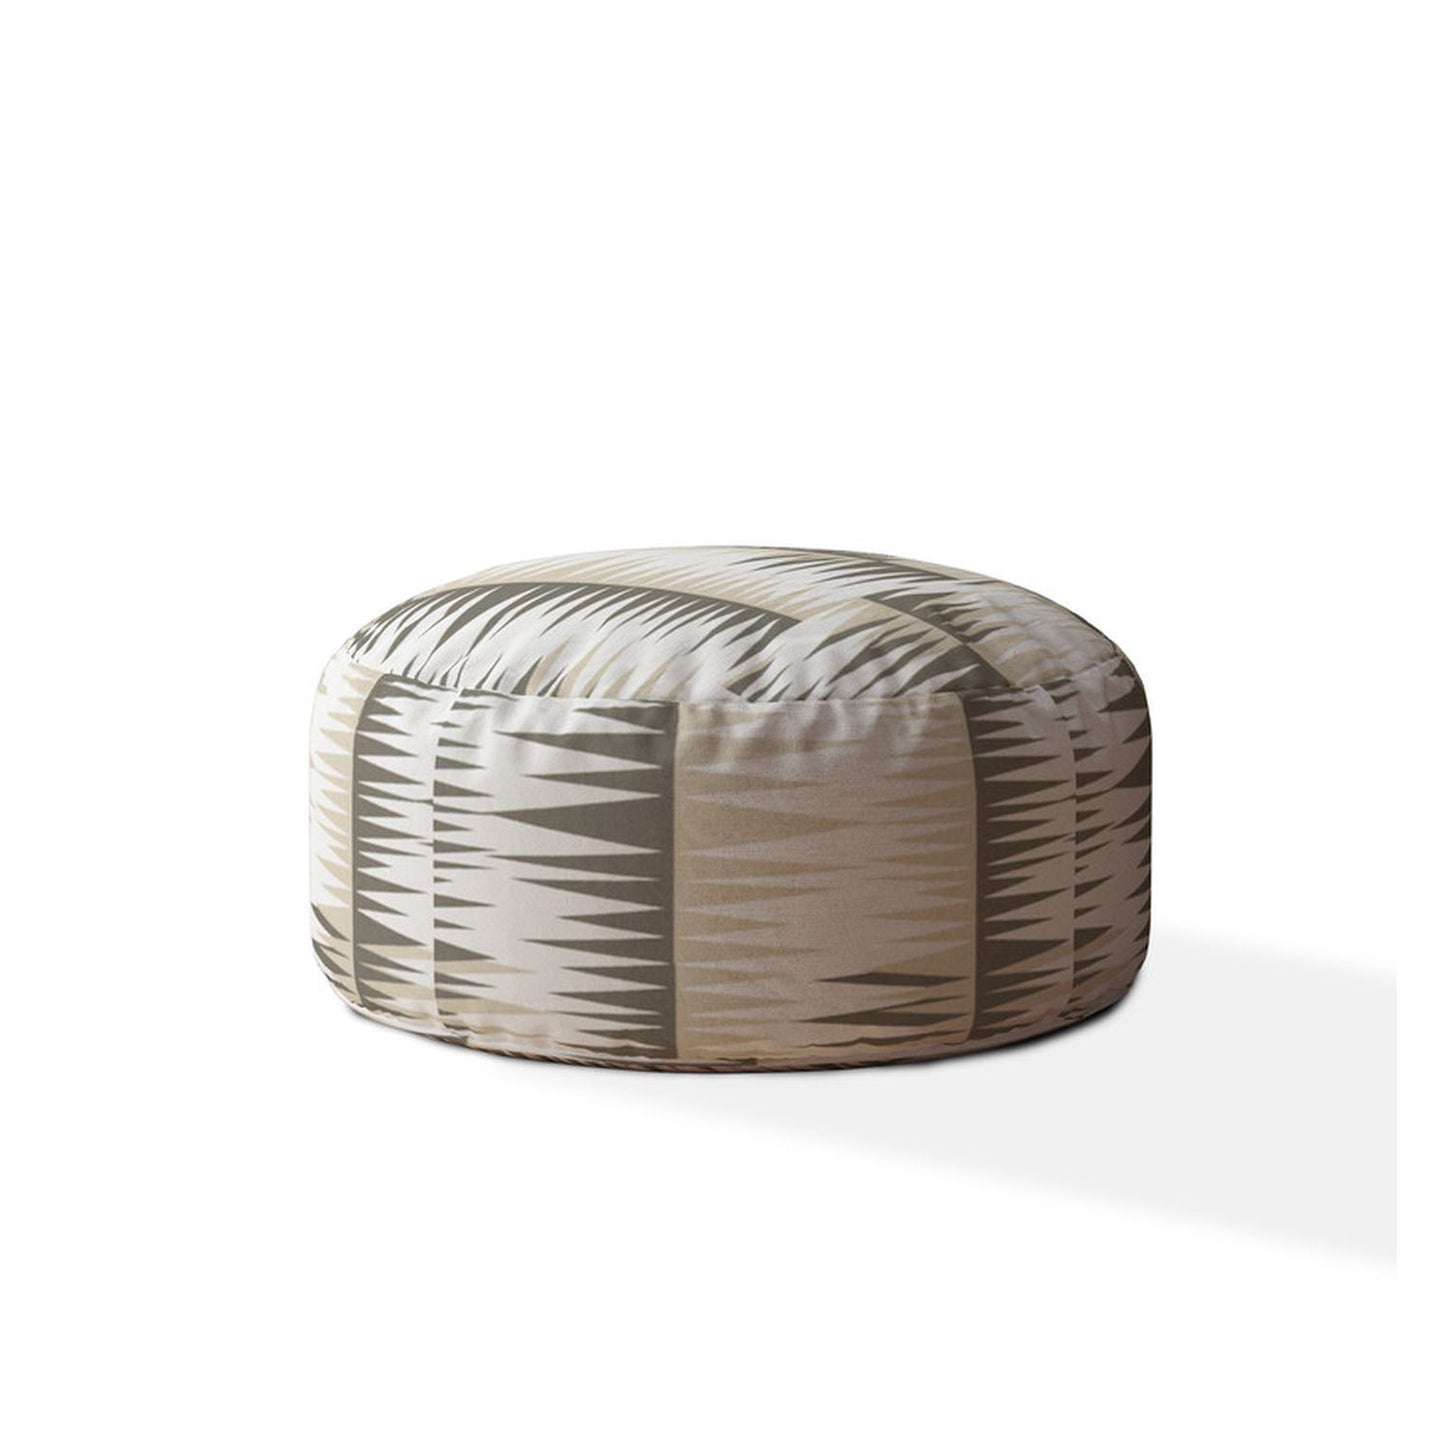 Indoor BANDELIER Blue/Taupe/Camel Tan Round Zipper Pouf - Cover Only - 24in dia x 20in tall